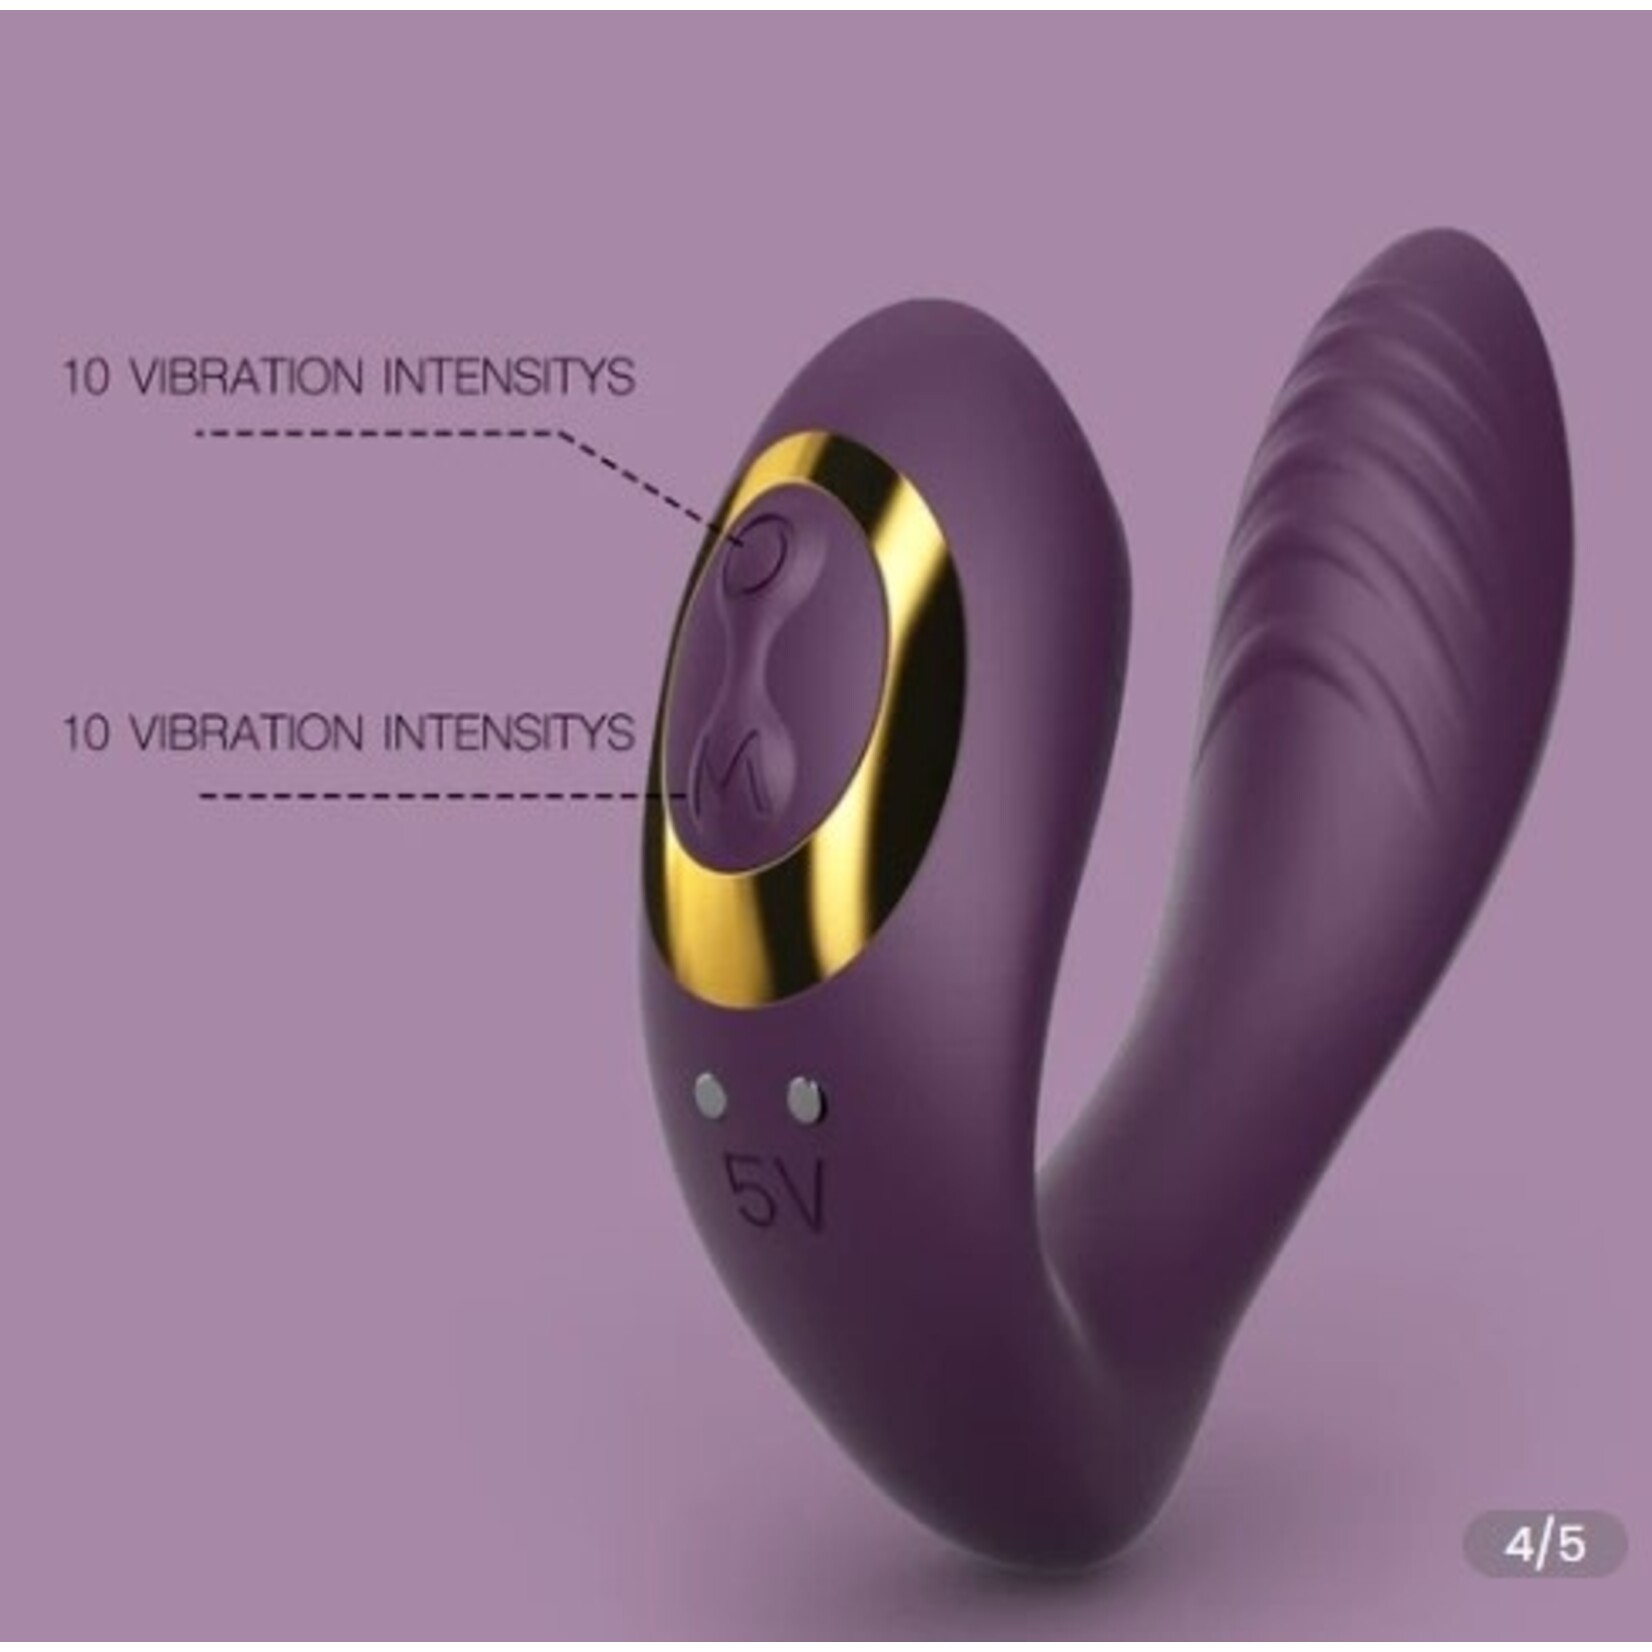 TRACY'S DOG TRACY'S DOG - WEARABLE PANTY VIBRATOR WITH ROMOTE CONTROL